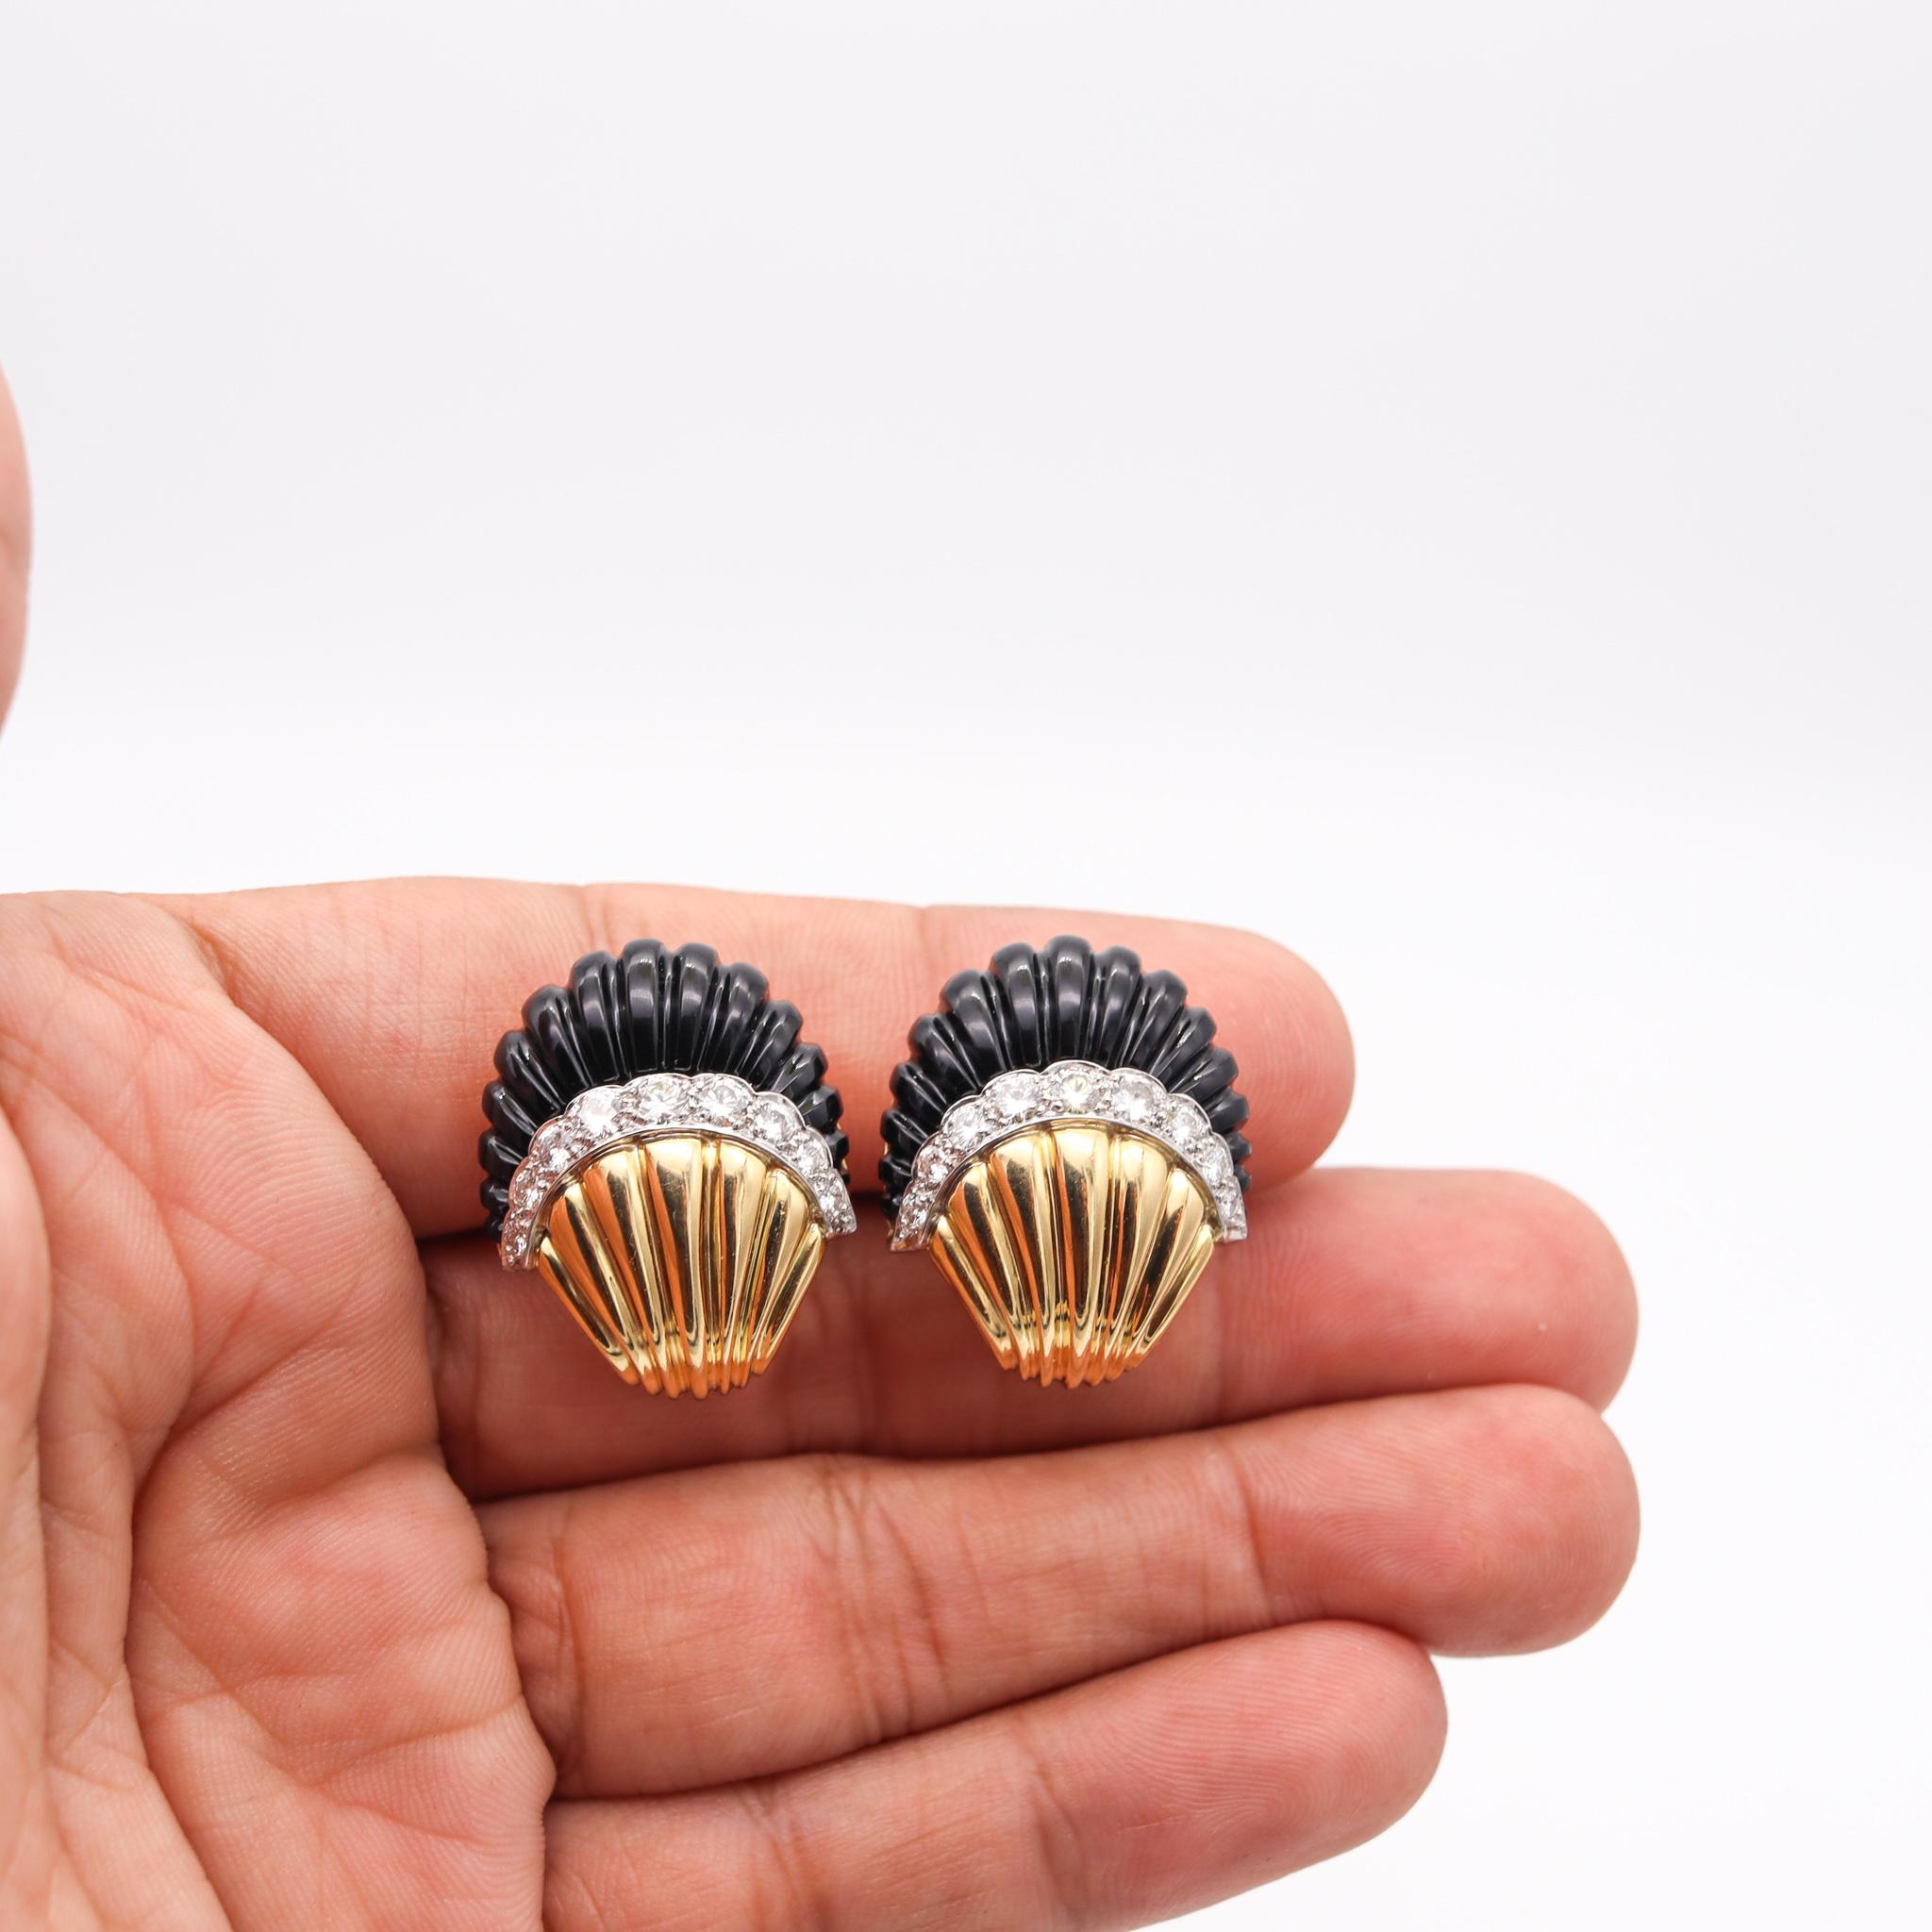 Women's Modernist Fluted Earrings in 18kt Yellow Gold with 20.28 Cts in Diamonds & Onyx